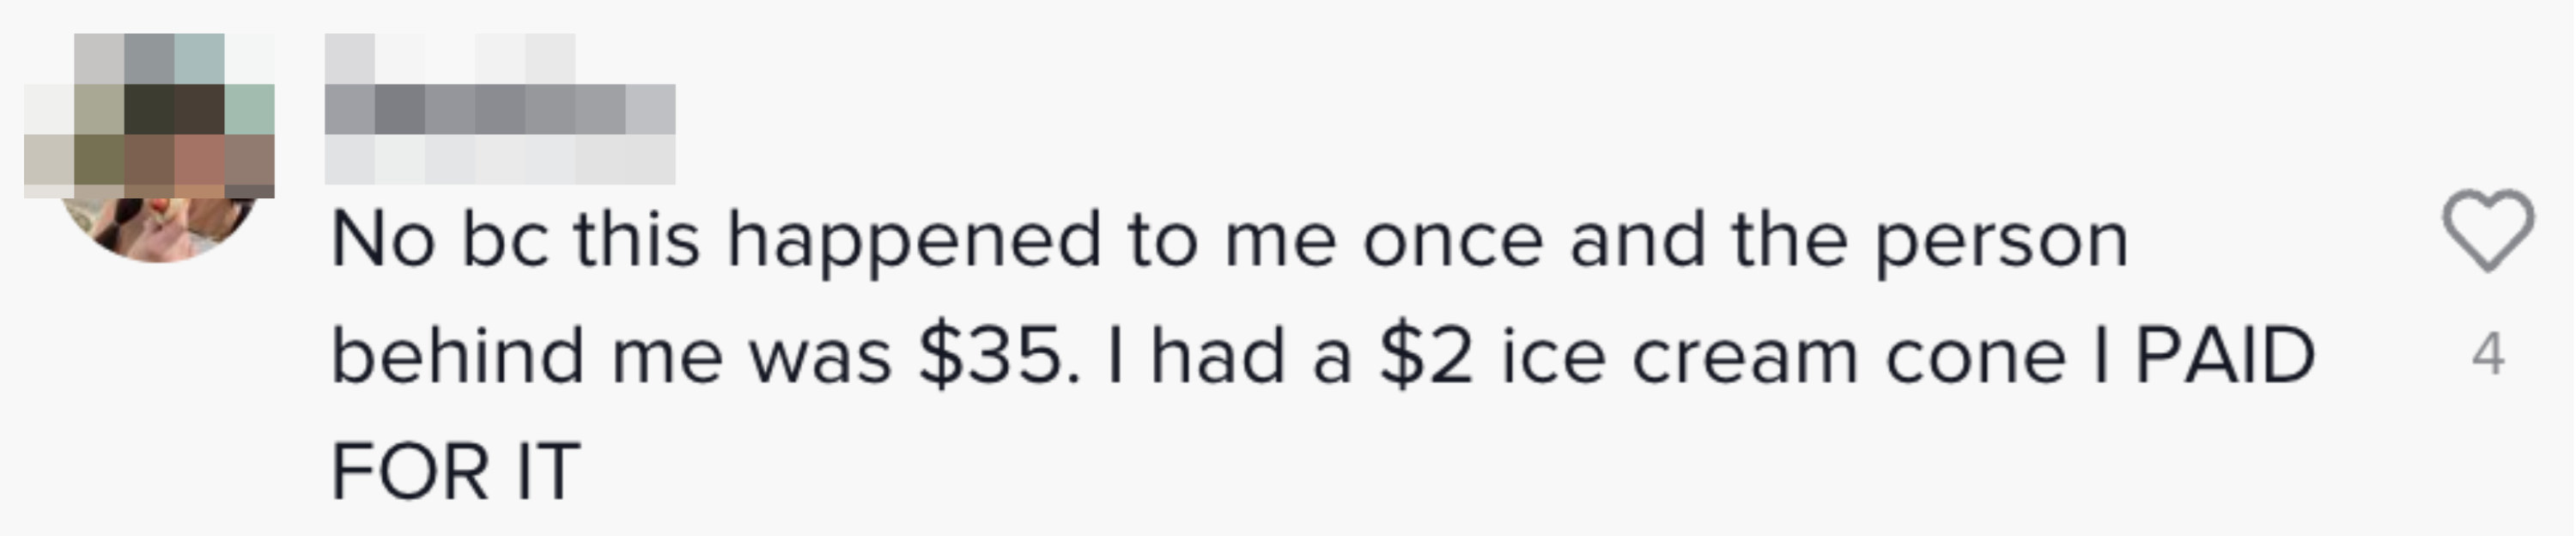 Comment: &quot;No bc this happened to me once and the person behind me was $35; I had a $2 ice cream cone I PAID FOR IT&quot;